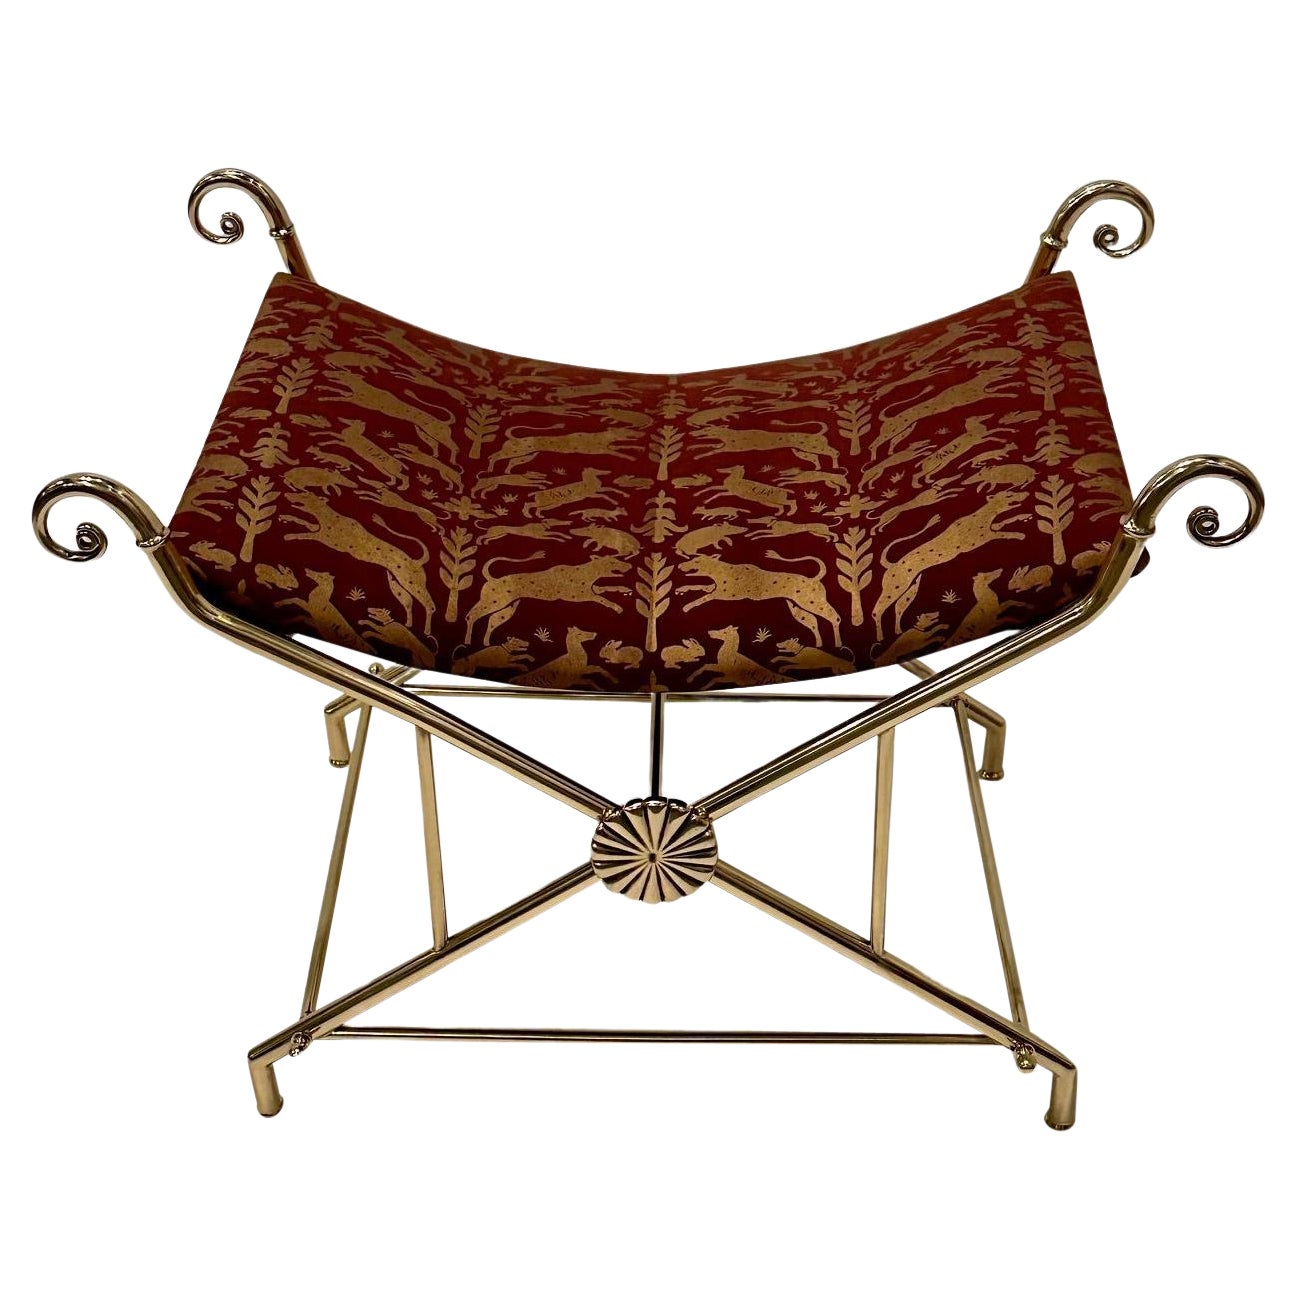 Glamorous Hollywood Regency Italian Brass Bench with Printed Leather Upholstery